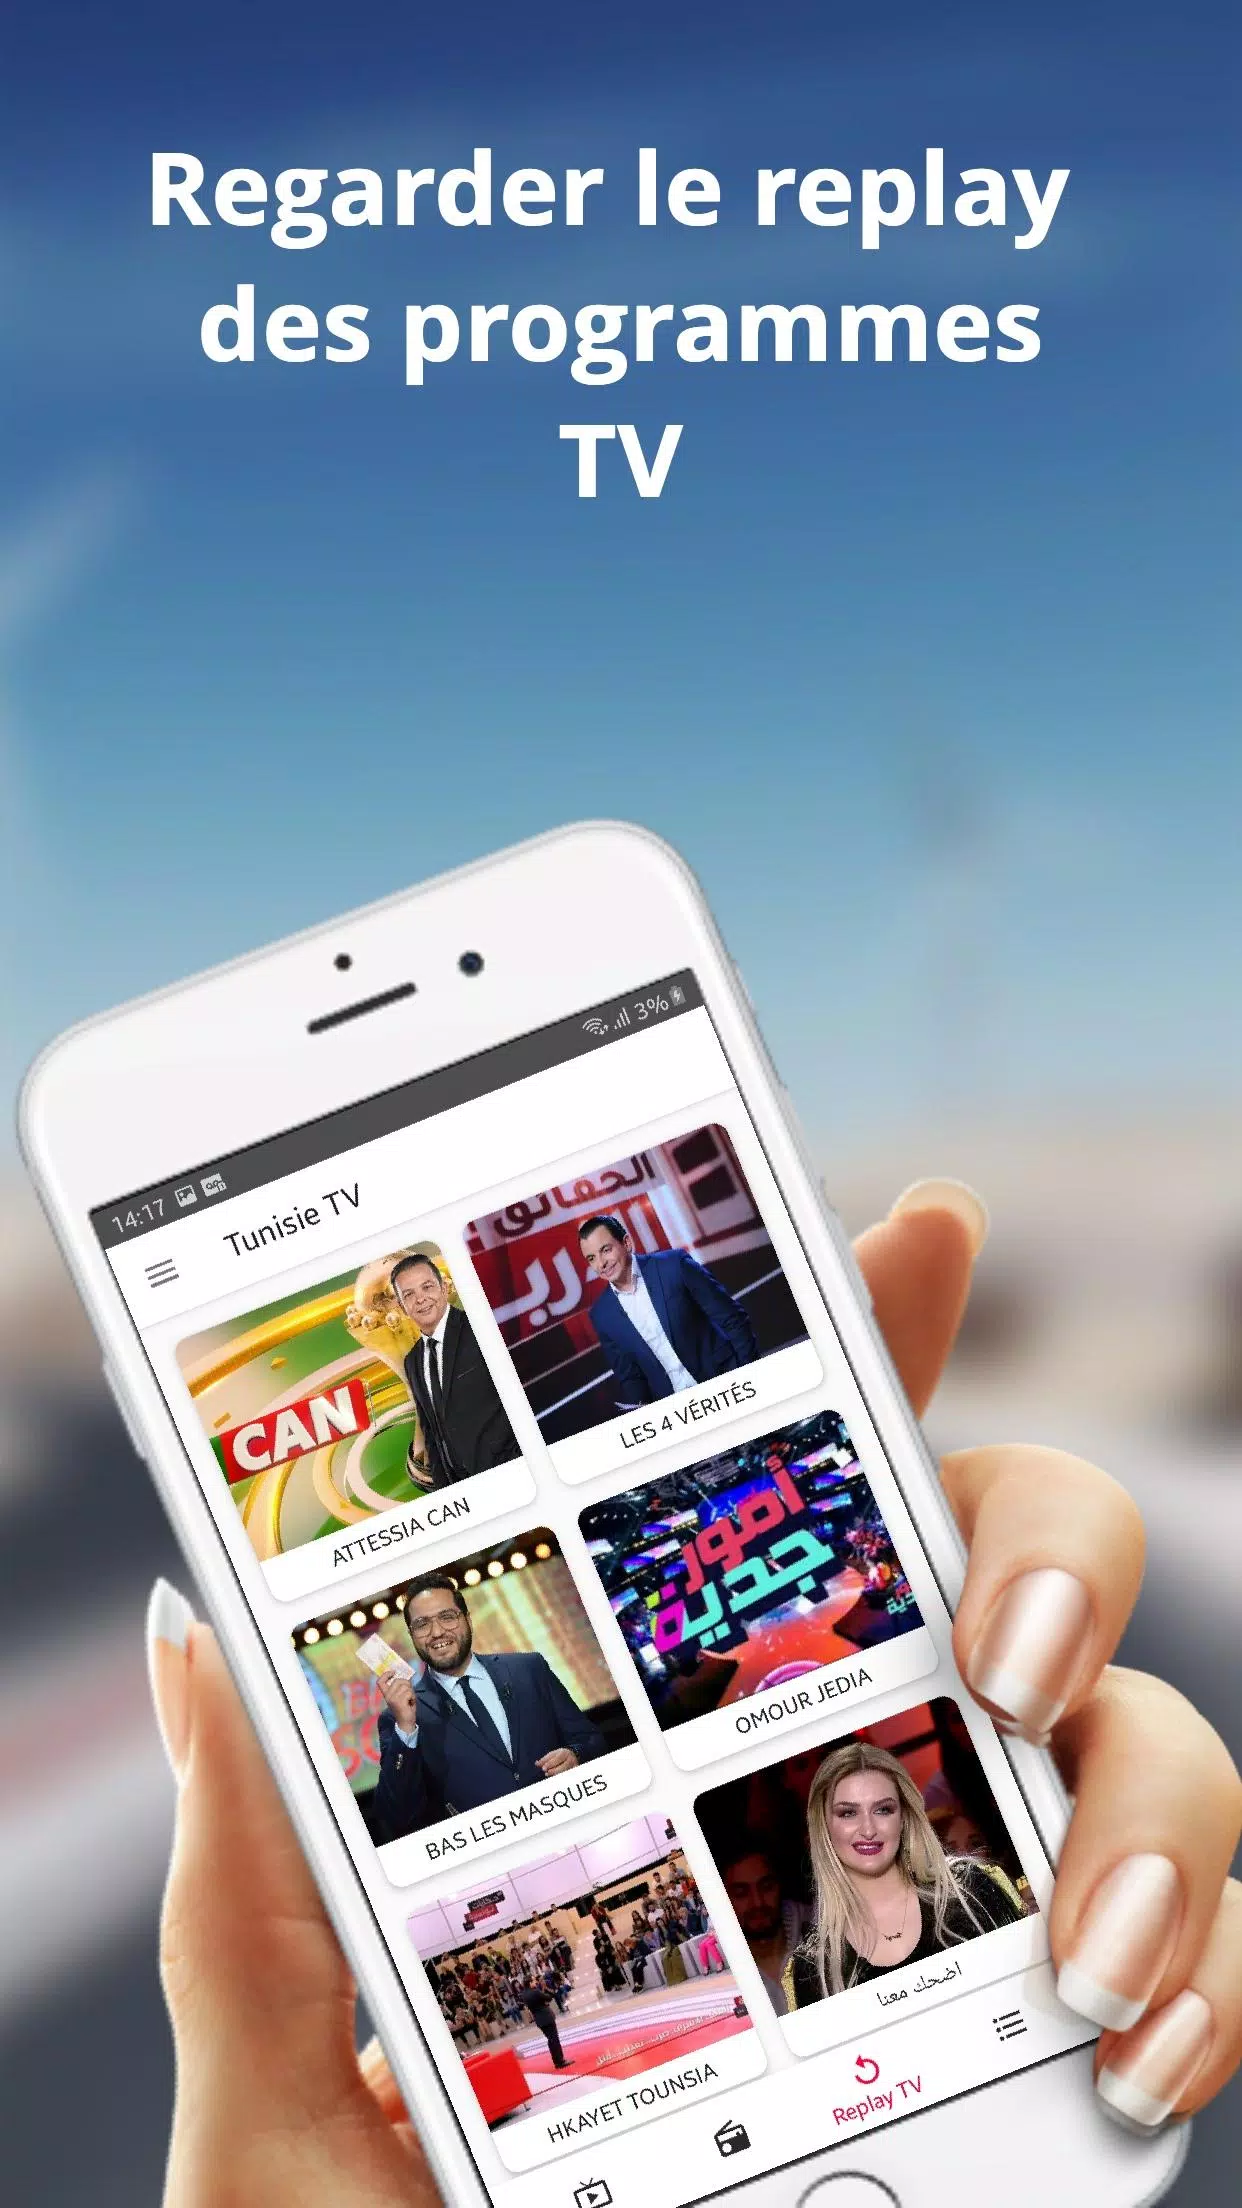 Tunisia Live TV Radio & News APK for Android Download